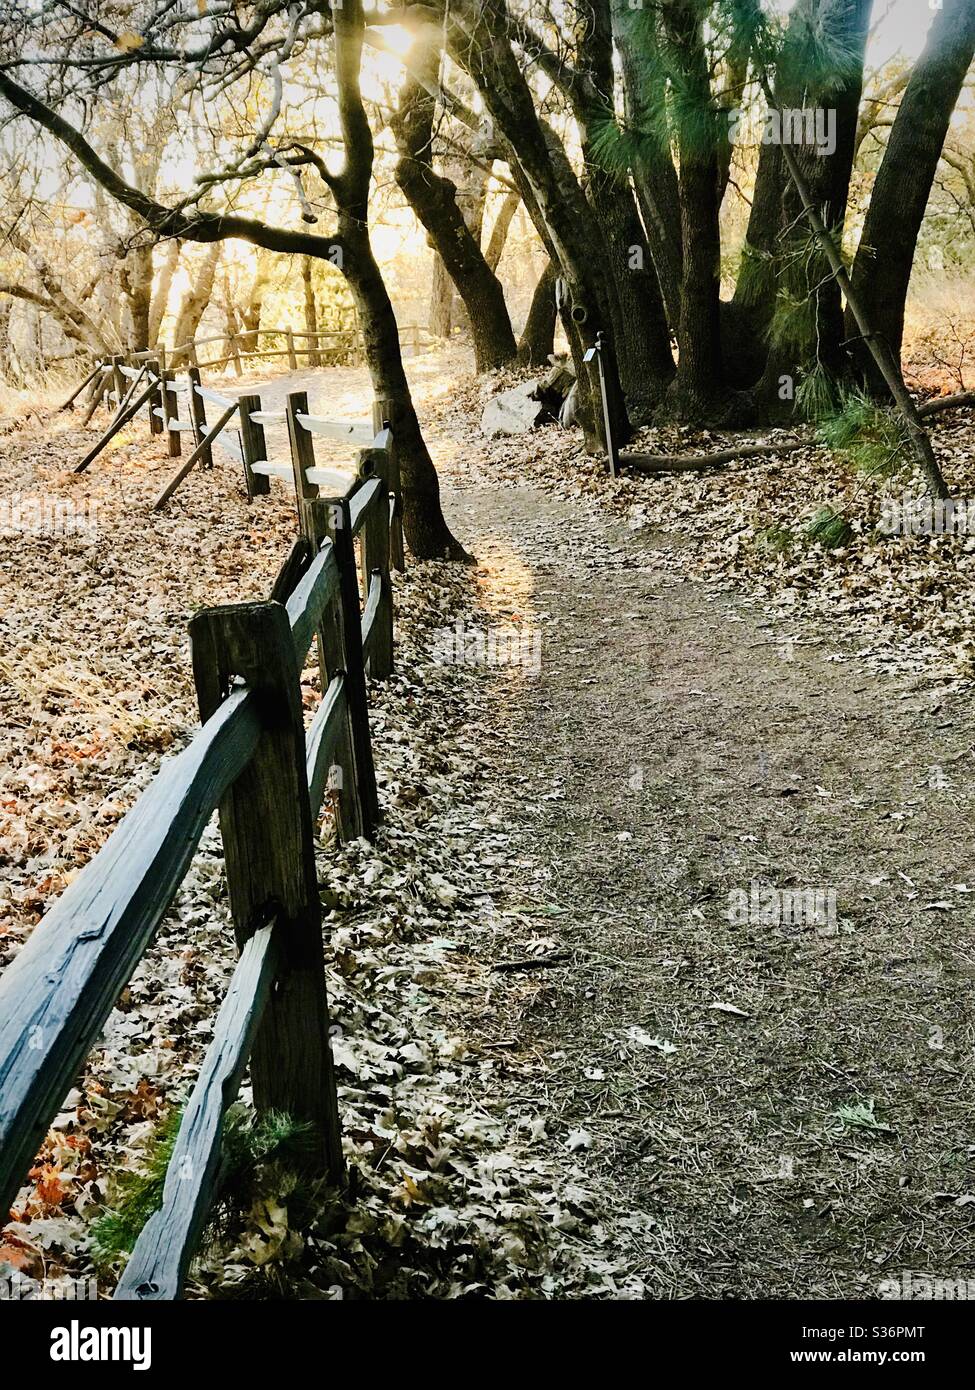 A winding wooden fence along a dirt path in the golden evening light of autumn. Stock Photo